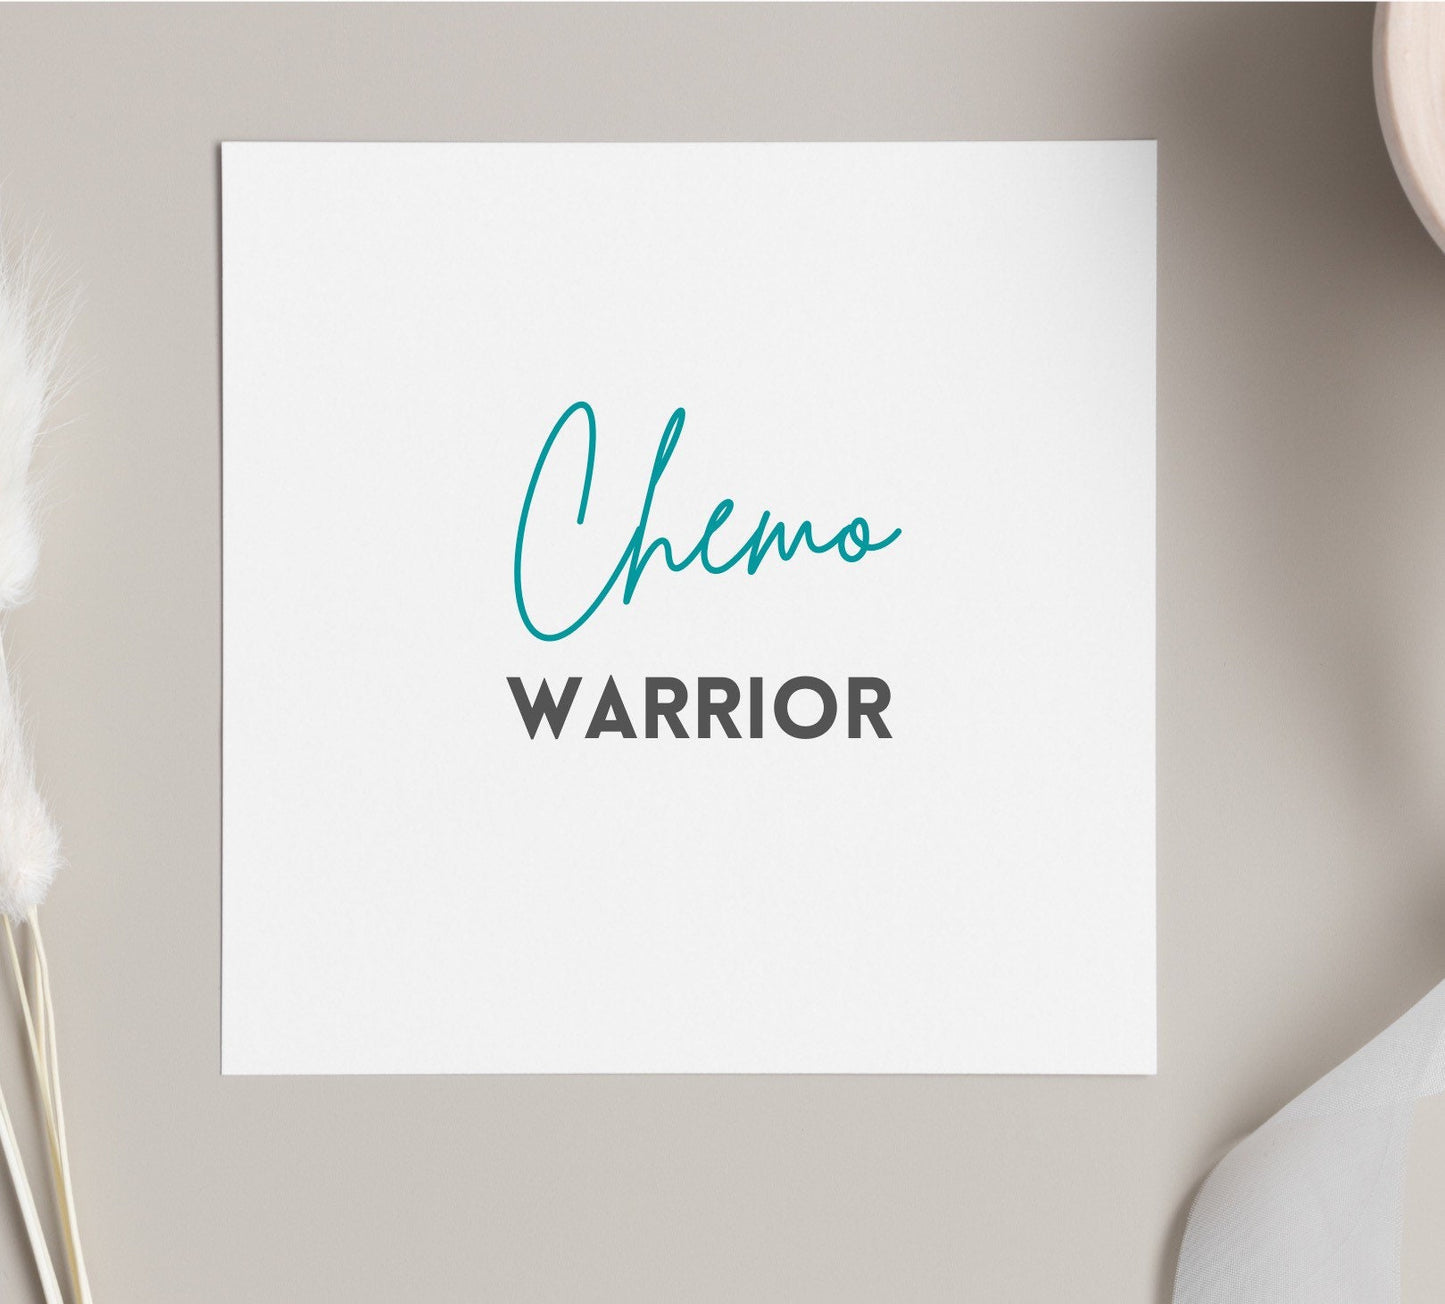 Chemo warrior card, chemo card, for friend having chemo, cancer cards, fighting cancer card, warrior, greetings cards, get well soon cards